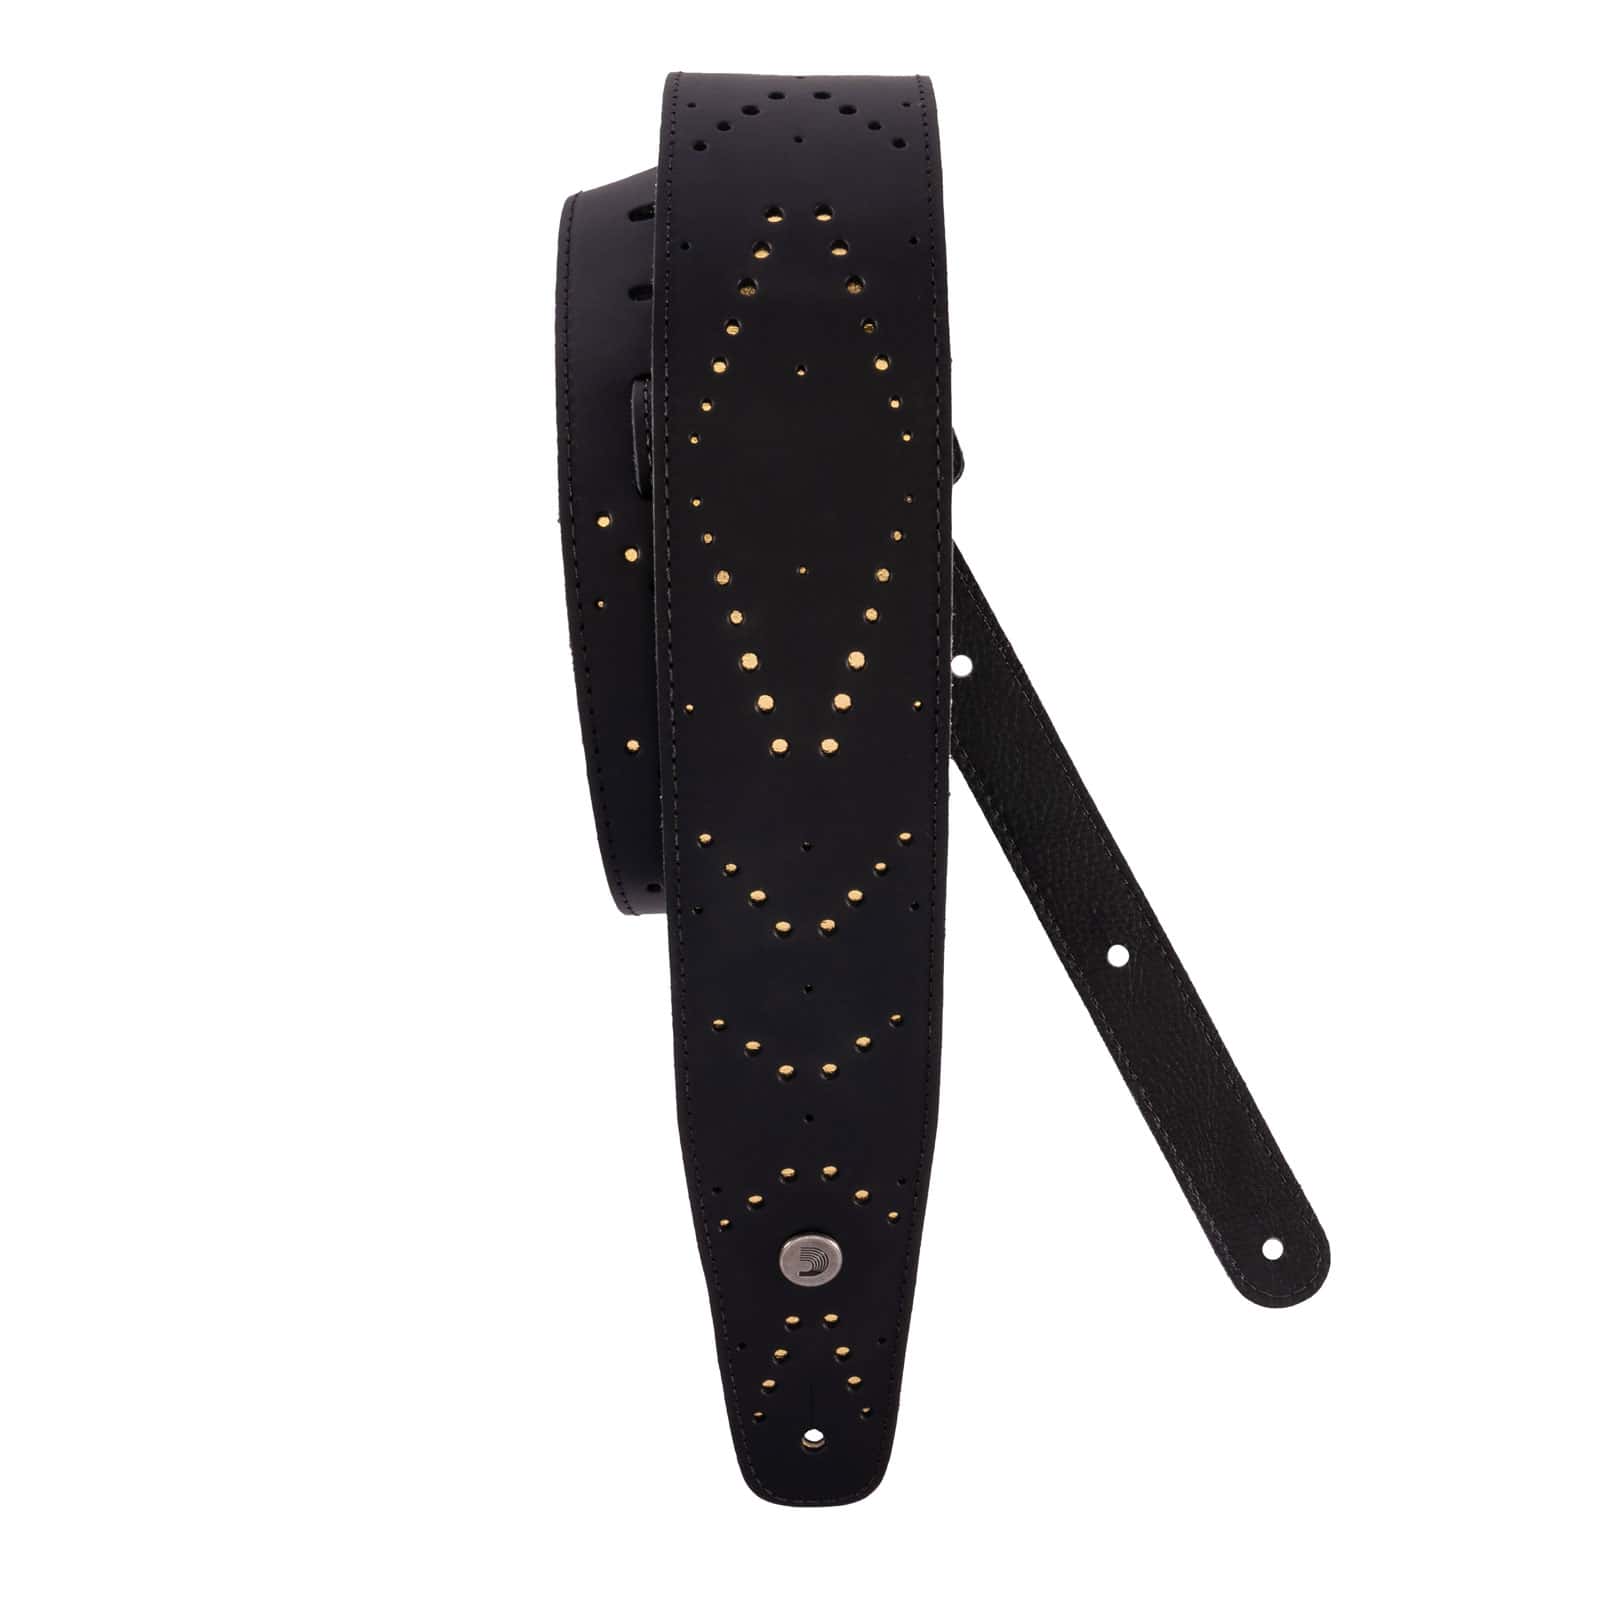 D'ADDARIO AND CO VENTED LEATHER GUITAR STRAP, STAR DUST